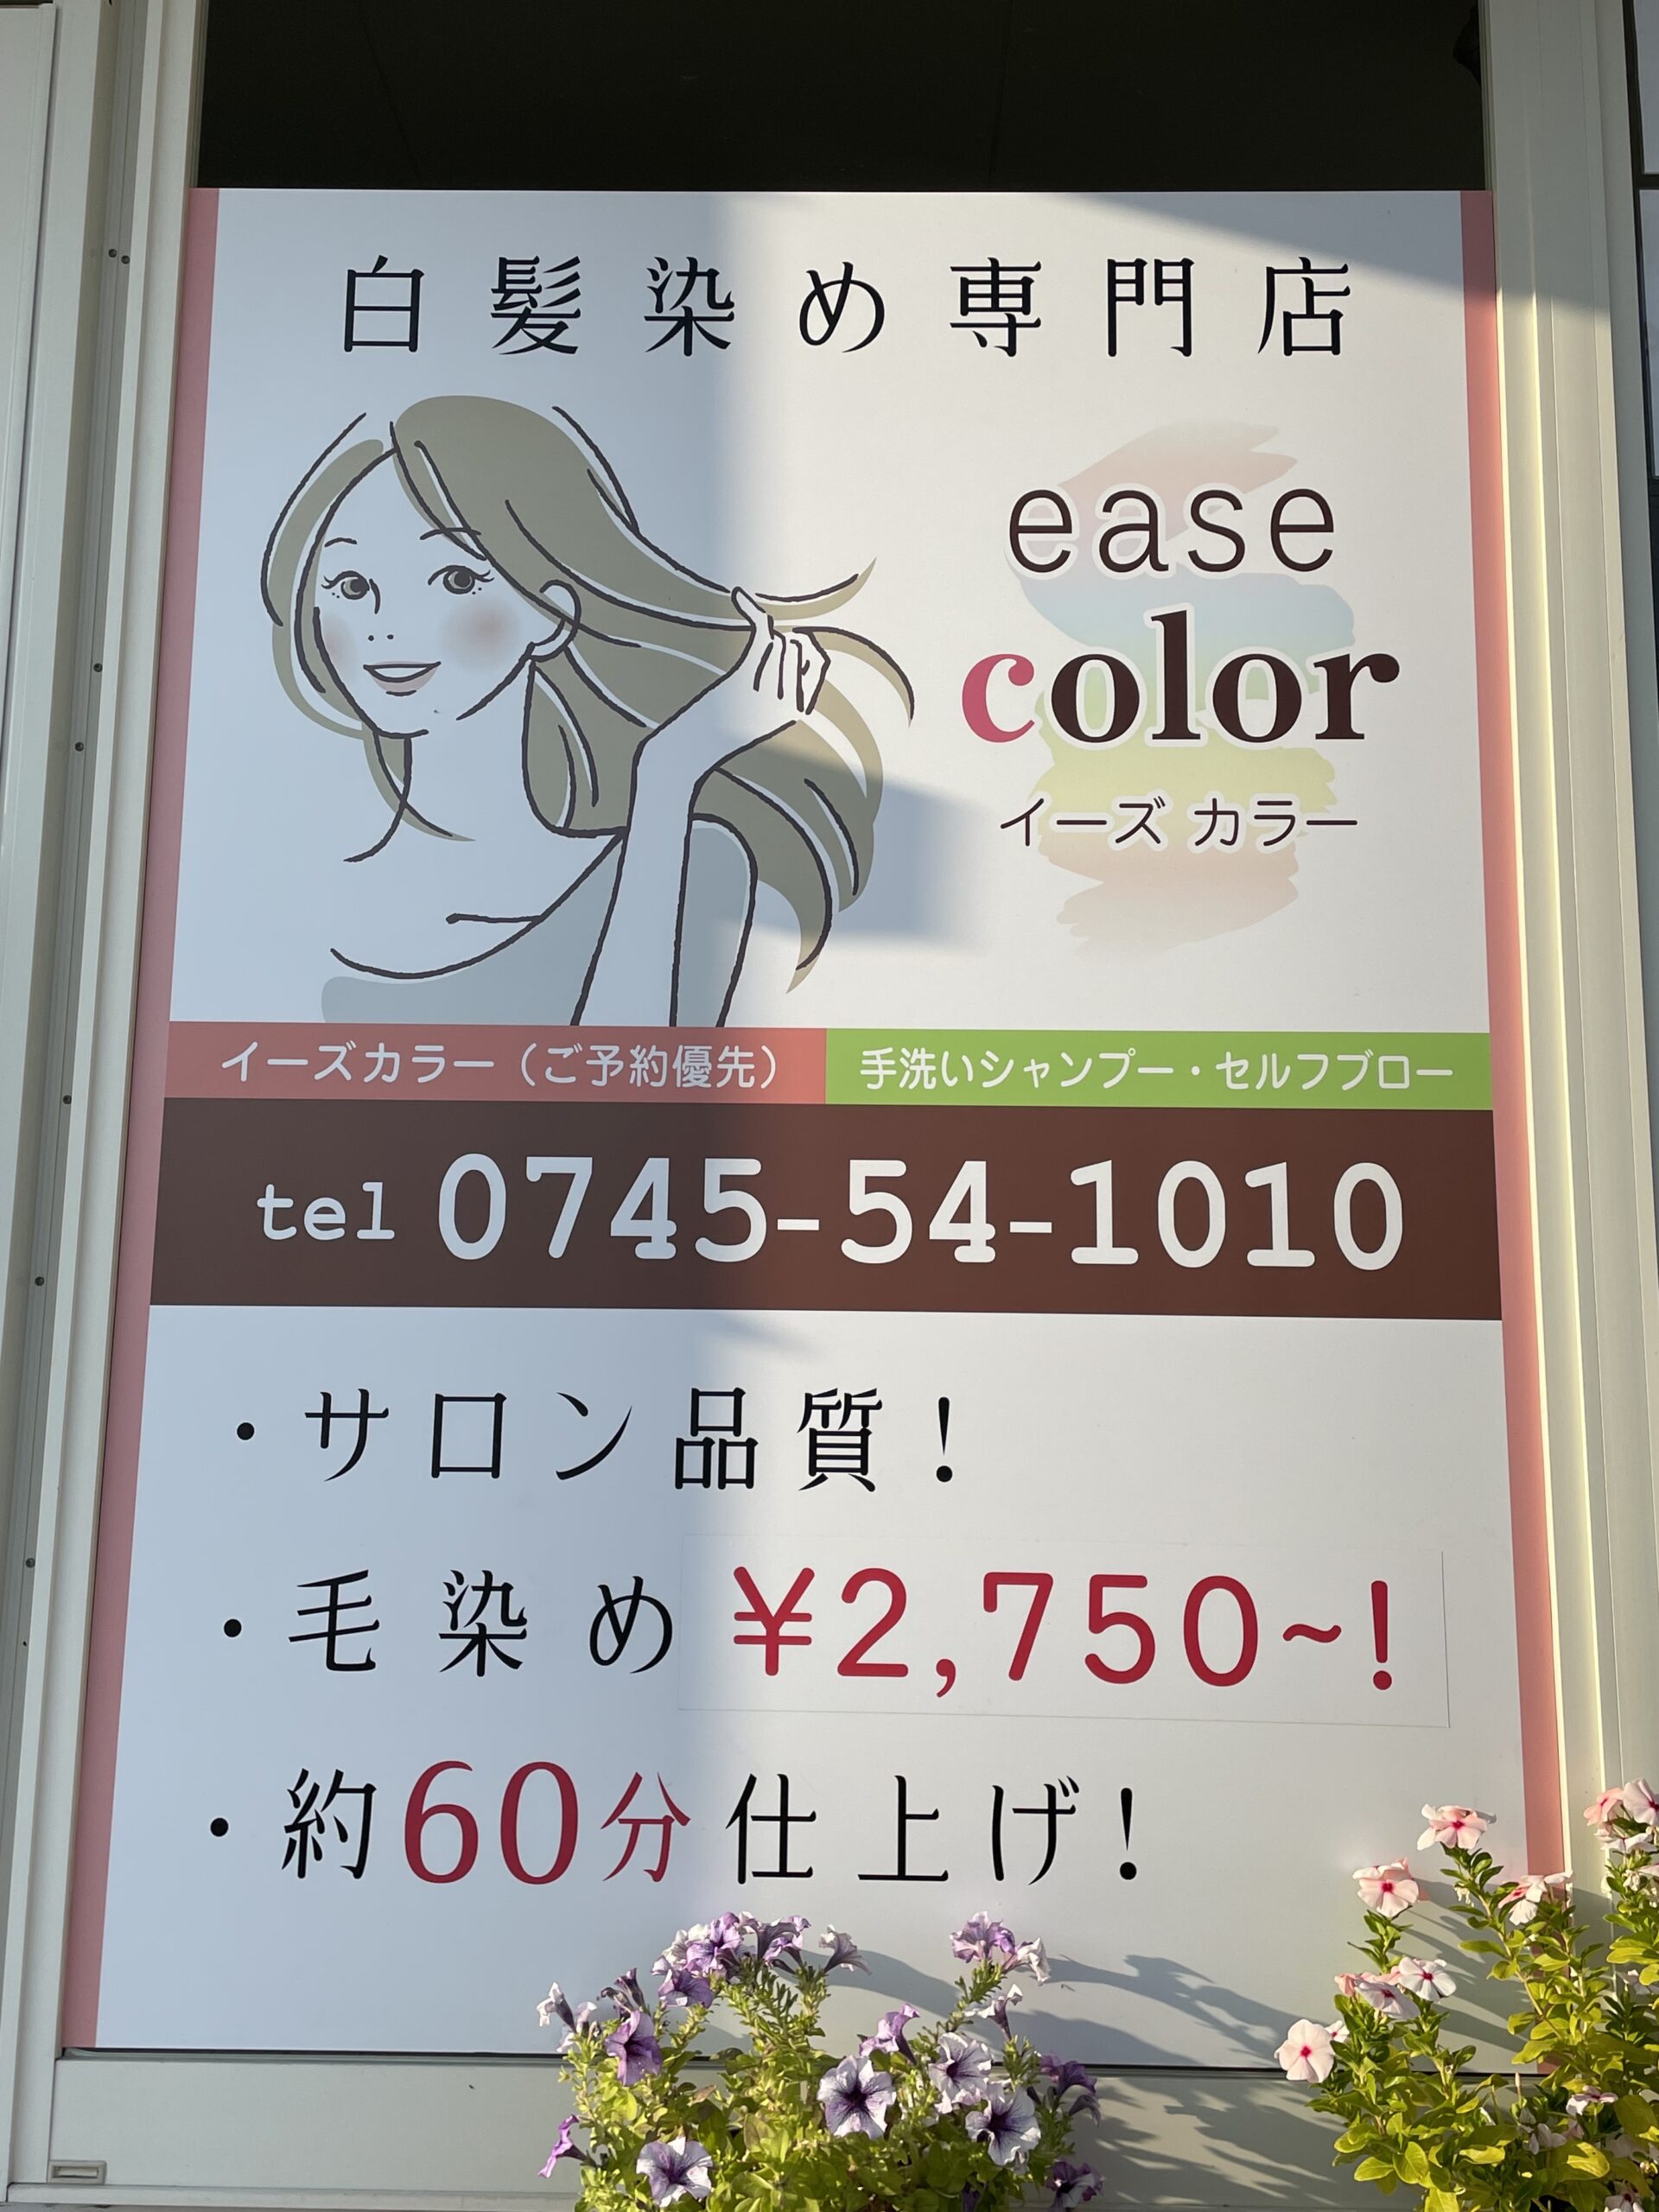 ease color 広陵店画像1